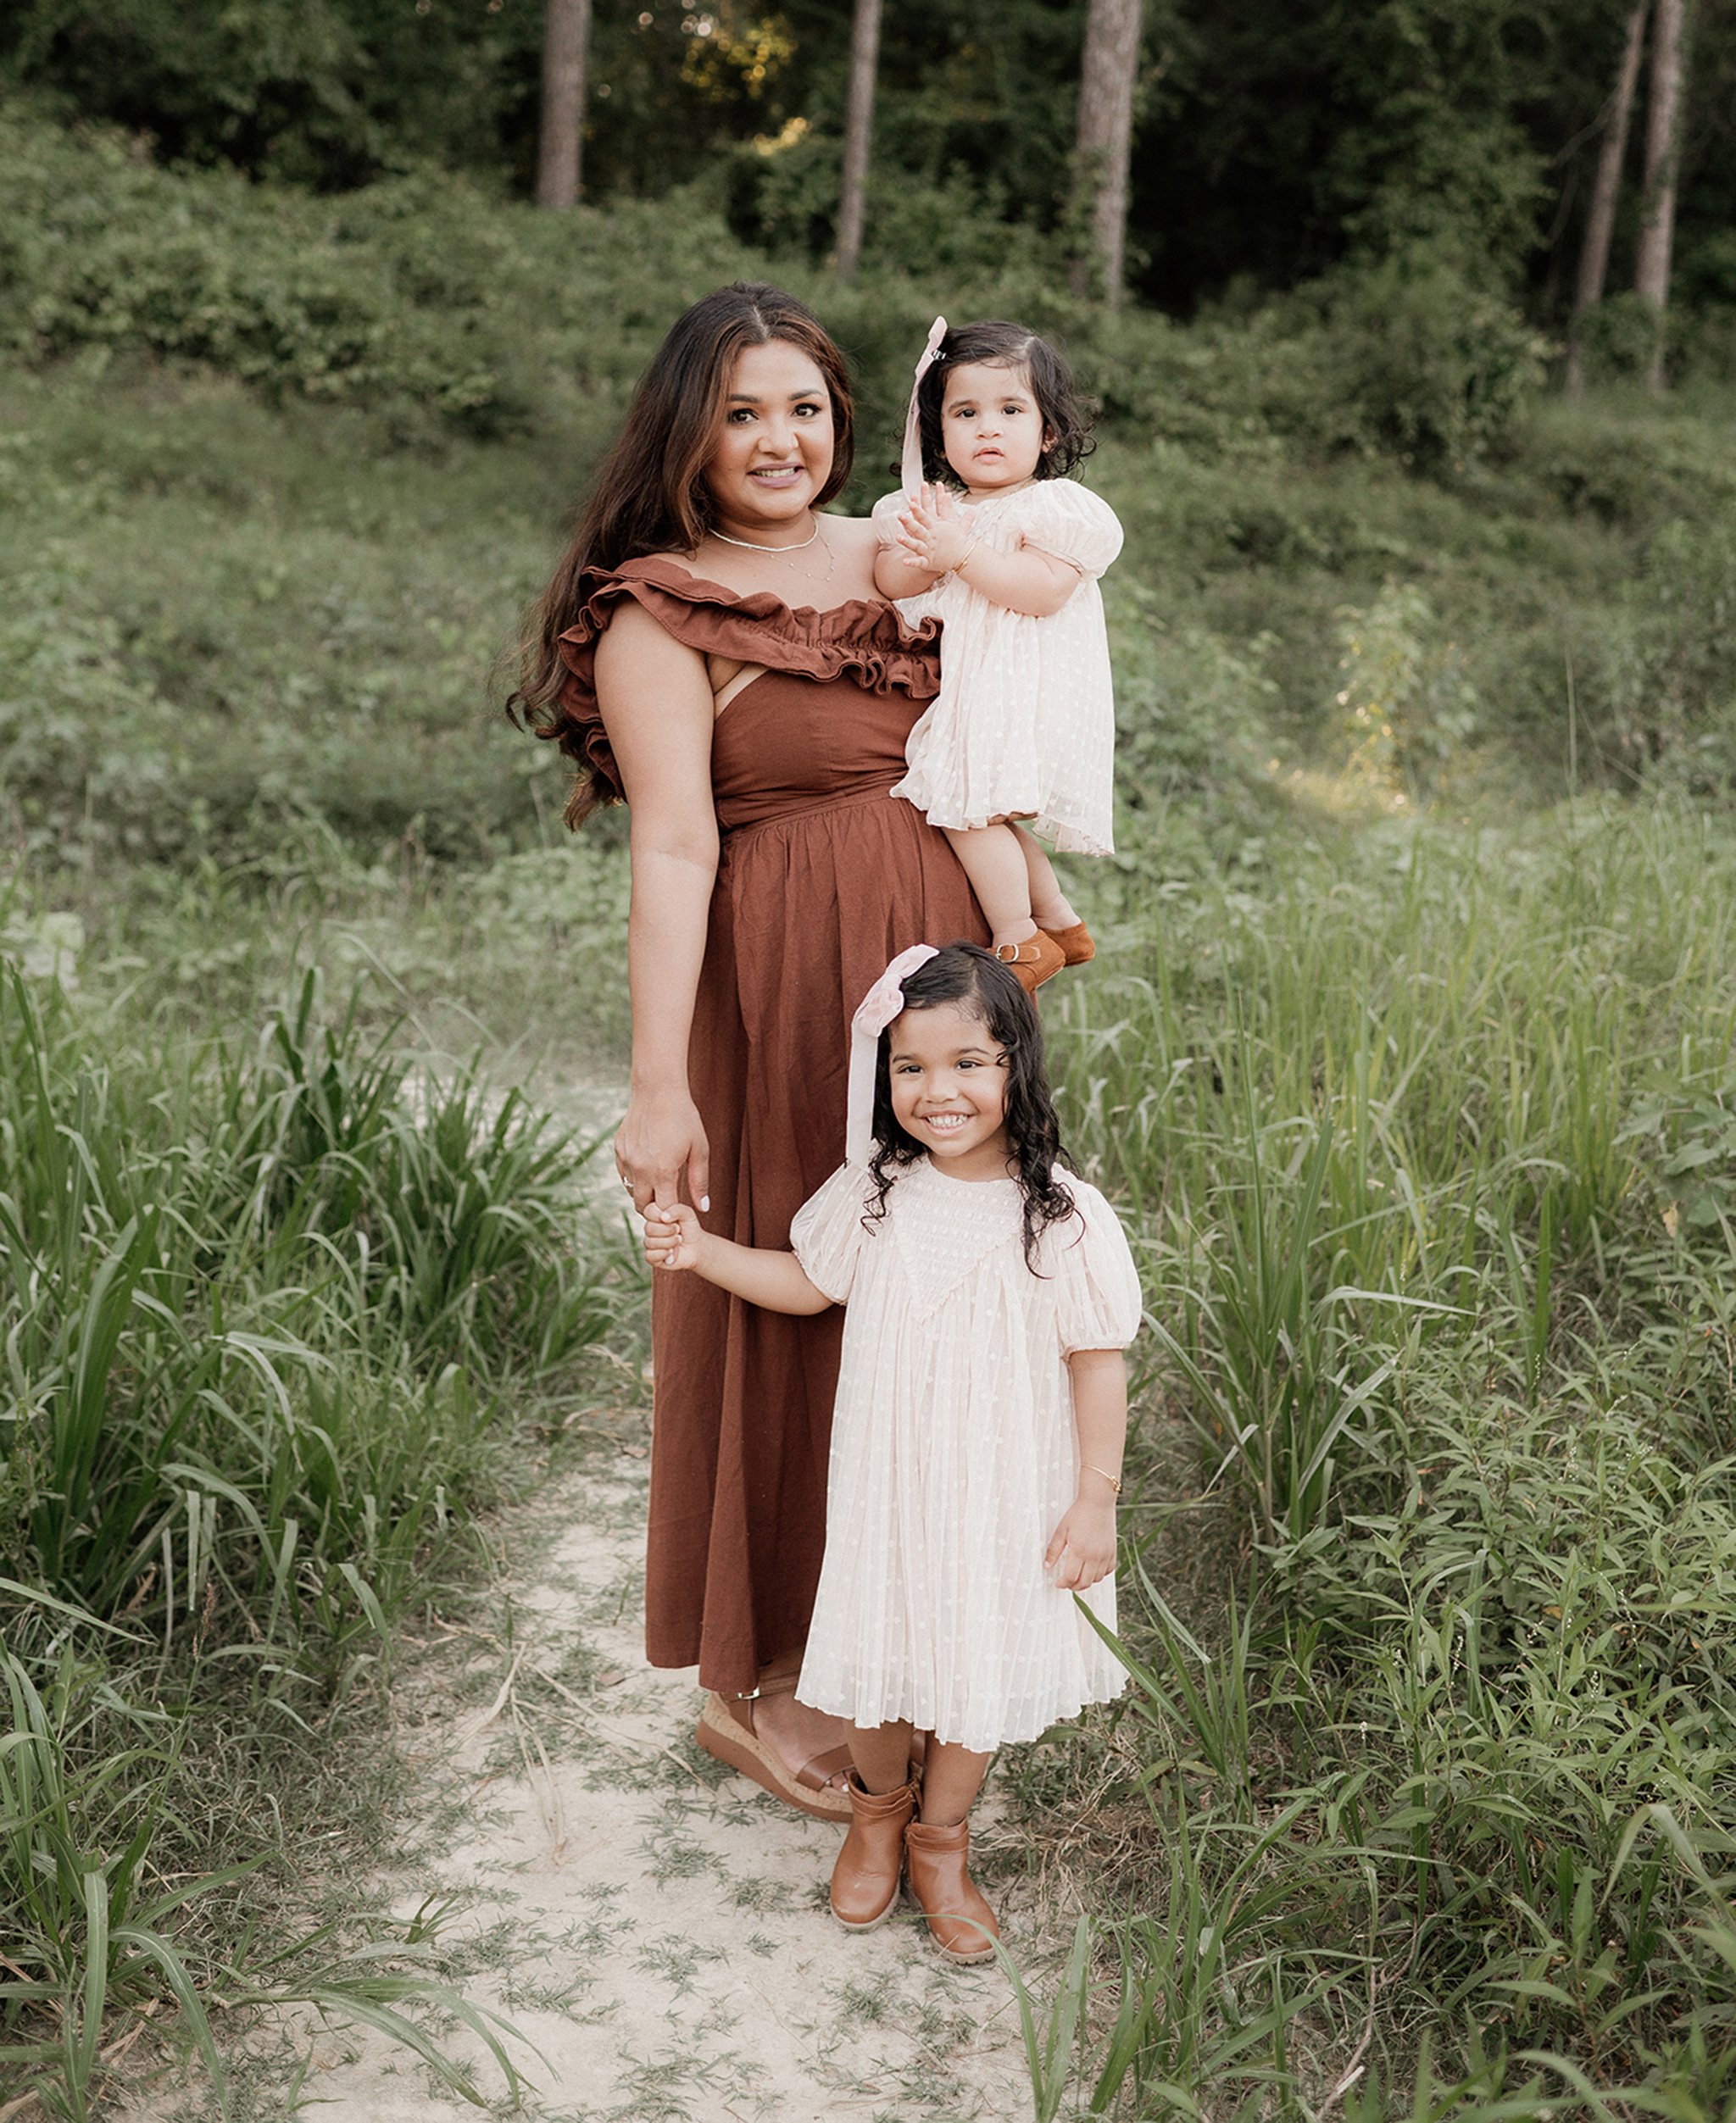 the woodlands family photographer _ conroe photographer _ houston family photographer _ ashley gillen photography _ texas family photographer _ conroe wedding photographer _ conroe texas _ cshi17.jpg